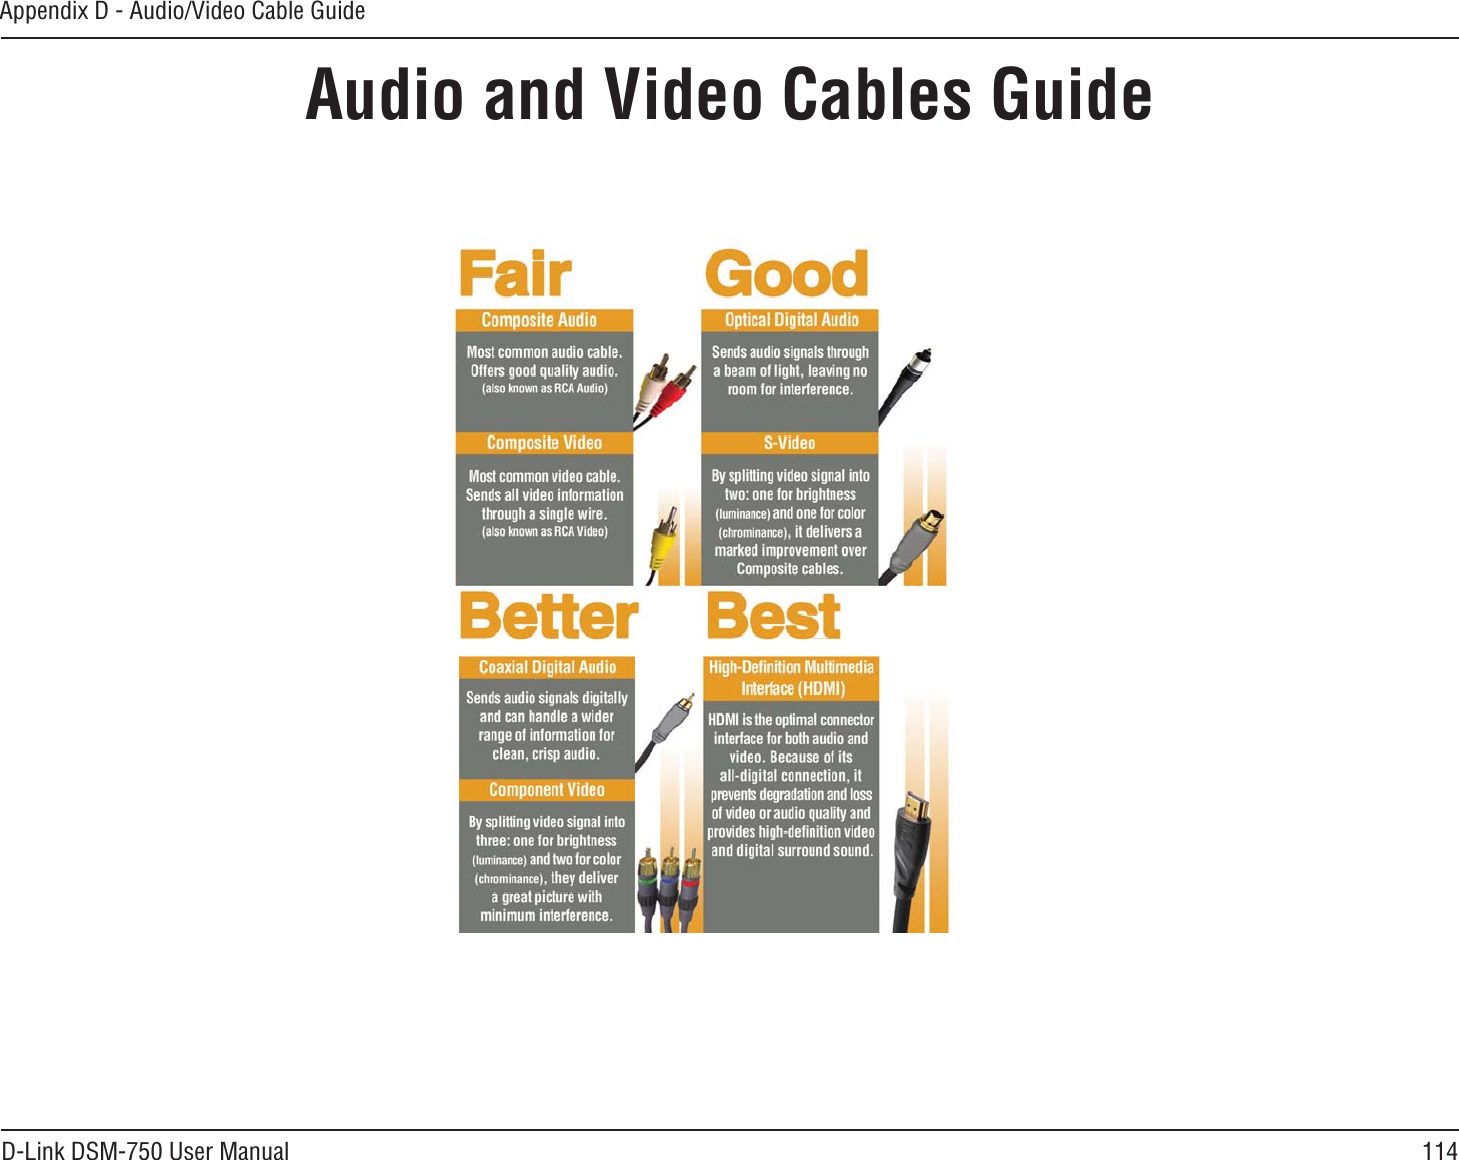 114D-Link DSM-750 User ManualAppendix D - Audio/Video Cable GuideAudio and Video Cables Guide